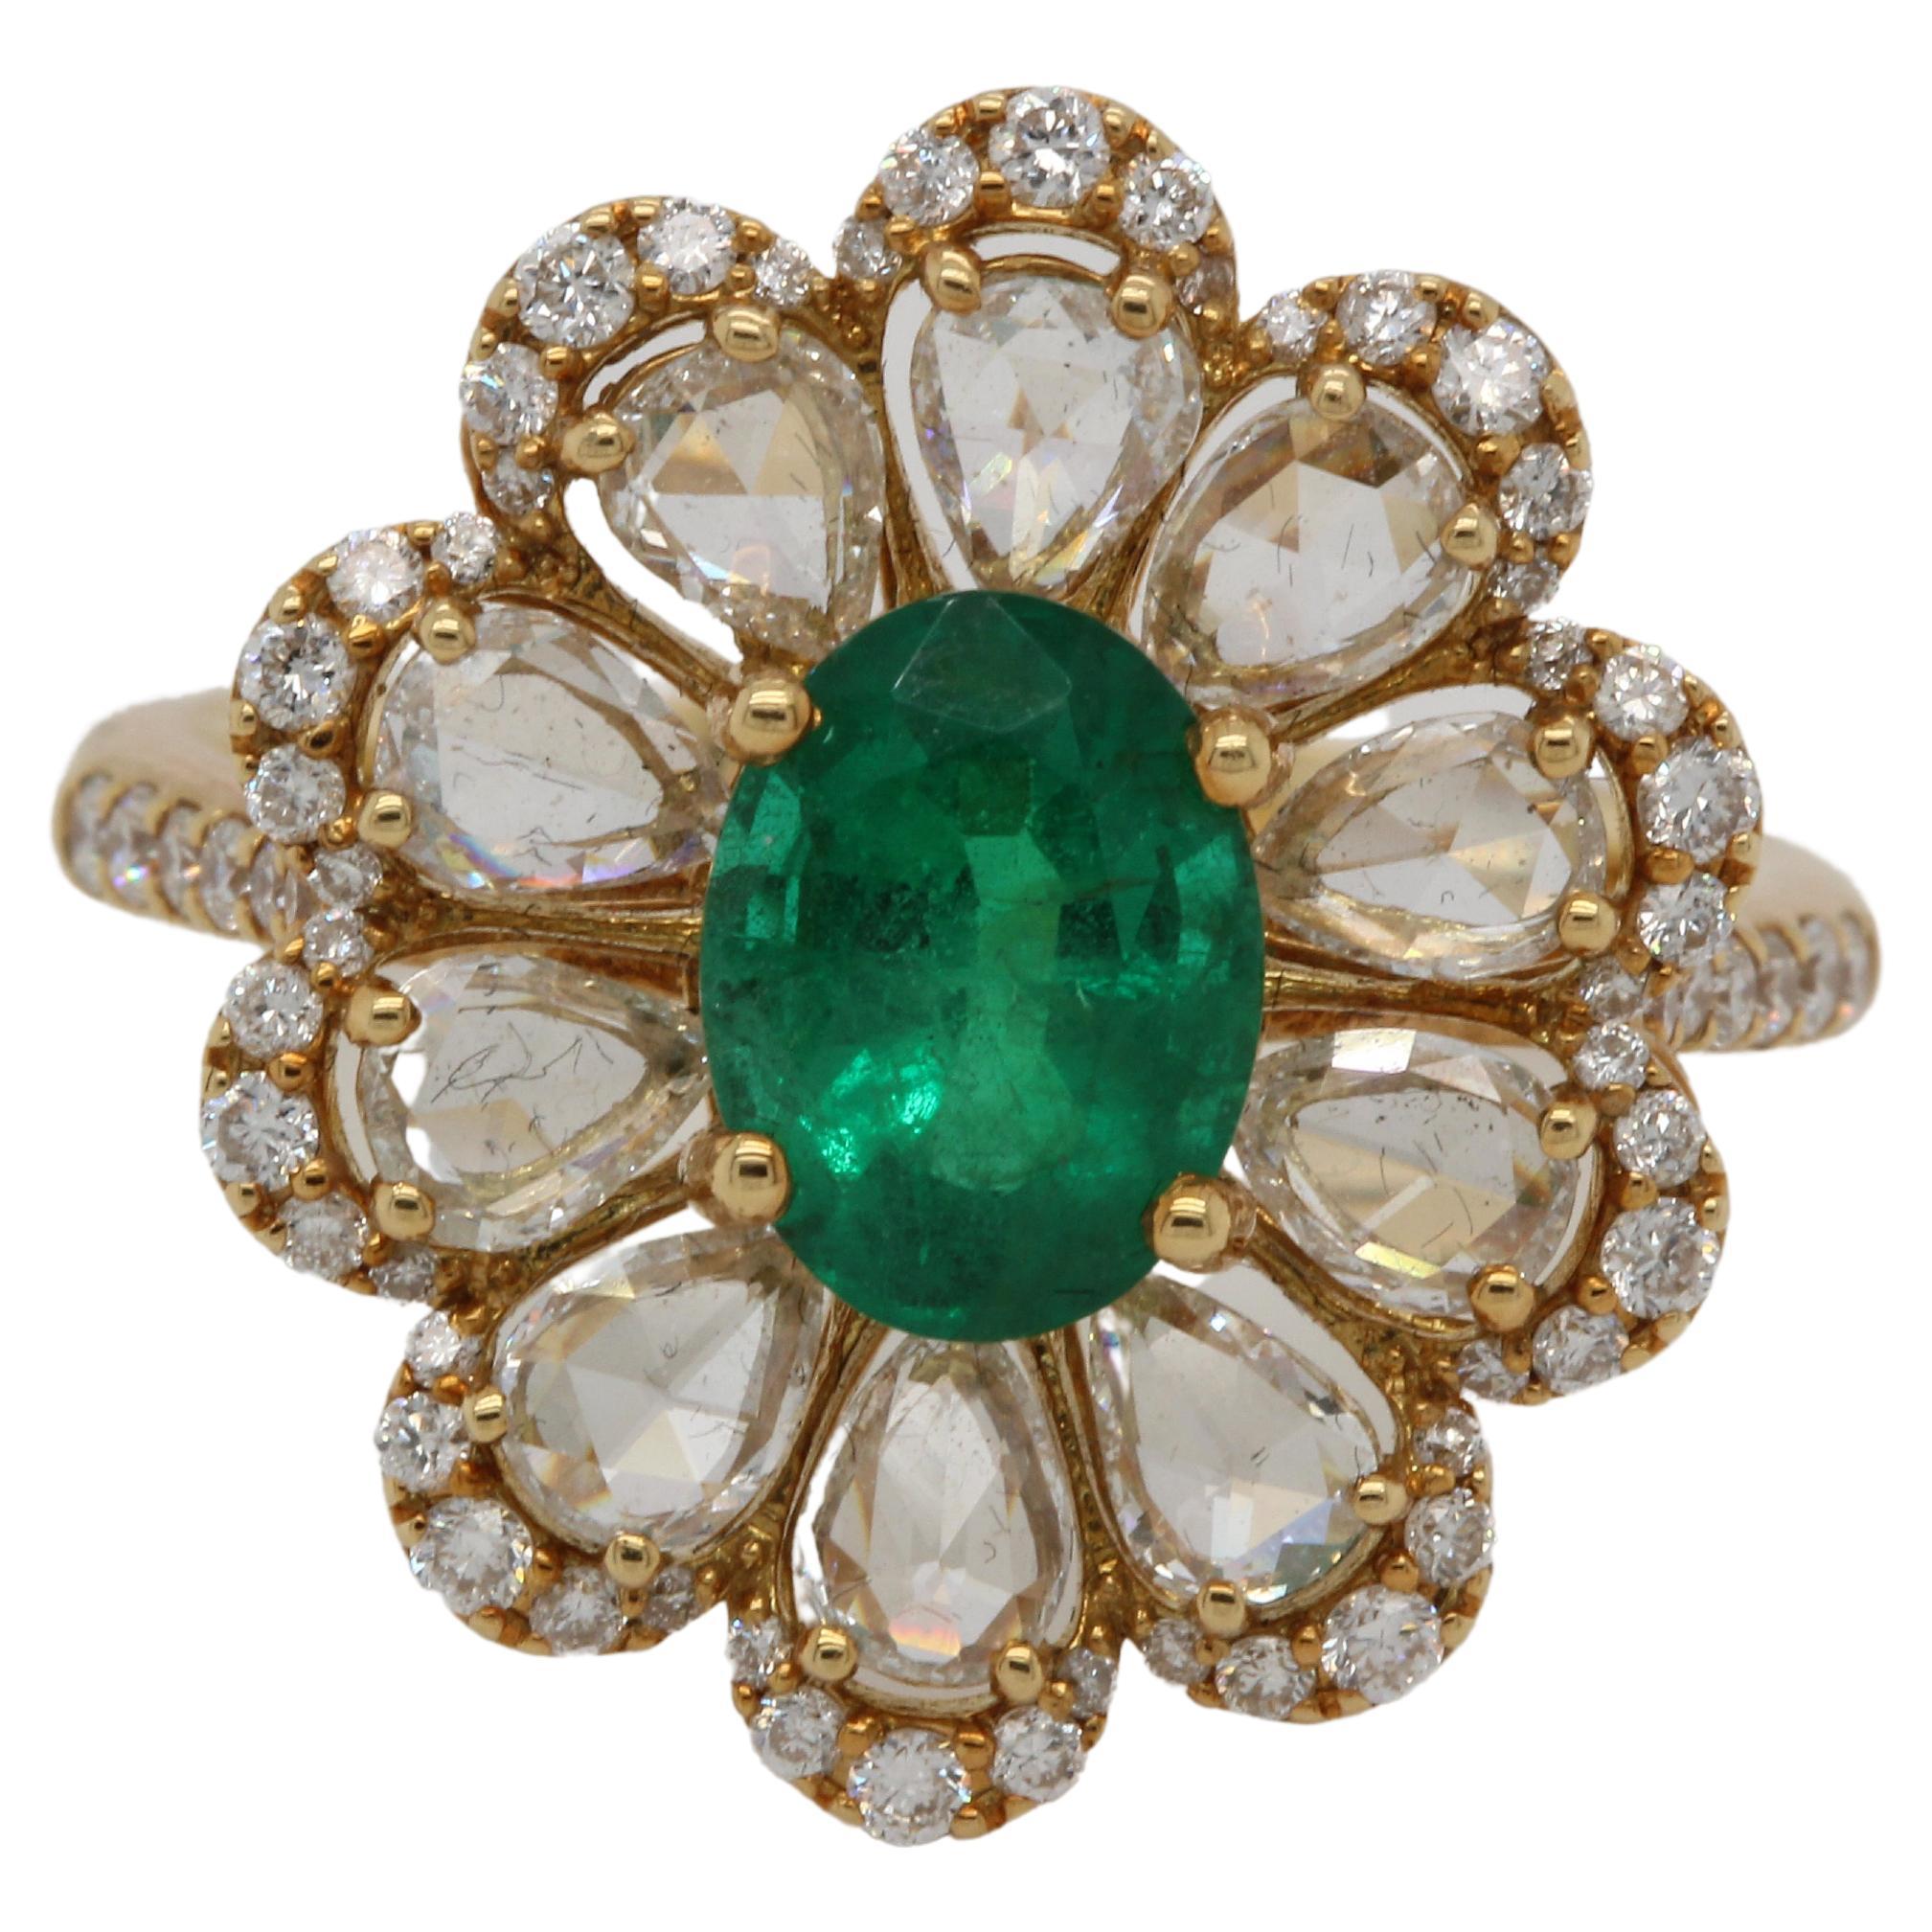 This emerald and diamond ring is a timeless piece of jewelry. The weighty gold setting and gorgeous emerald make this ring easy to wear with everything from jeans to dresses. The rich color of the emerald compliments any skin tone, making it a